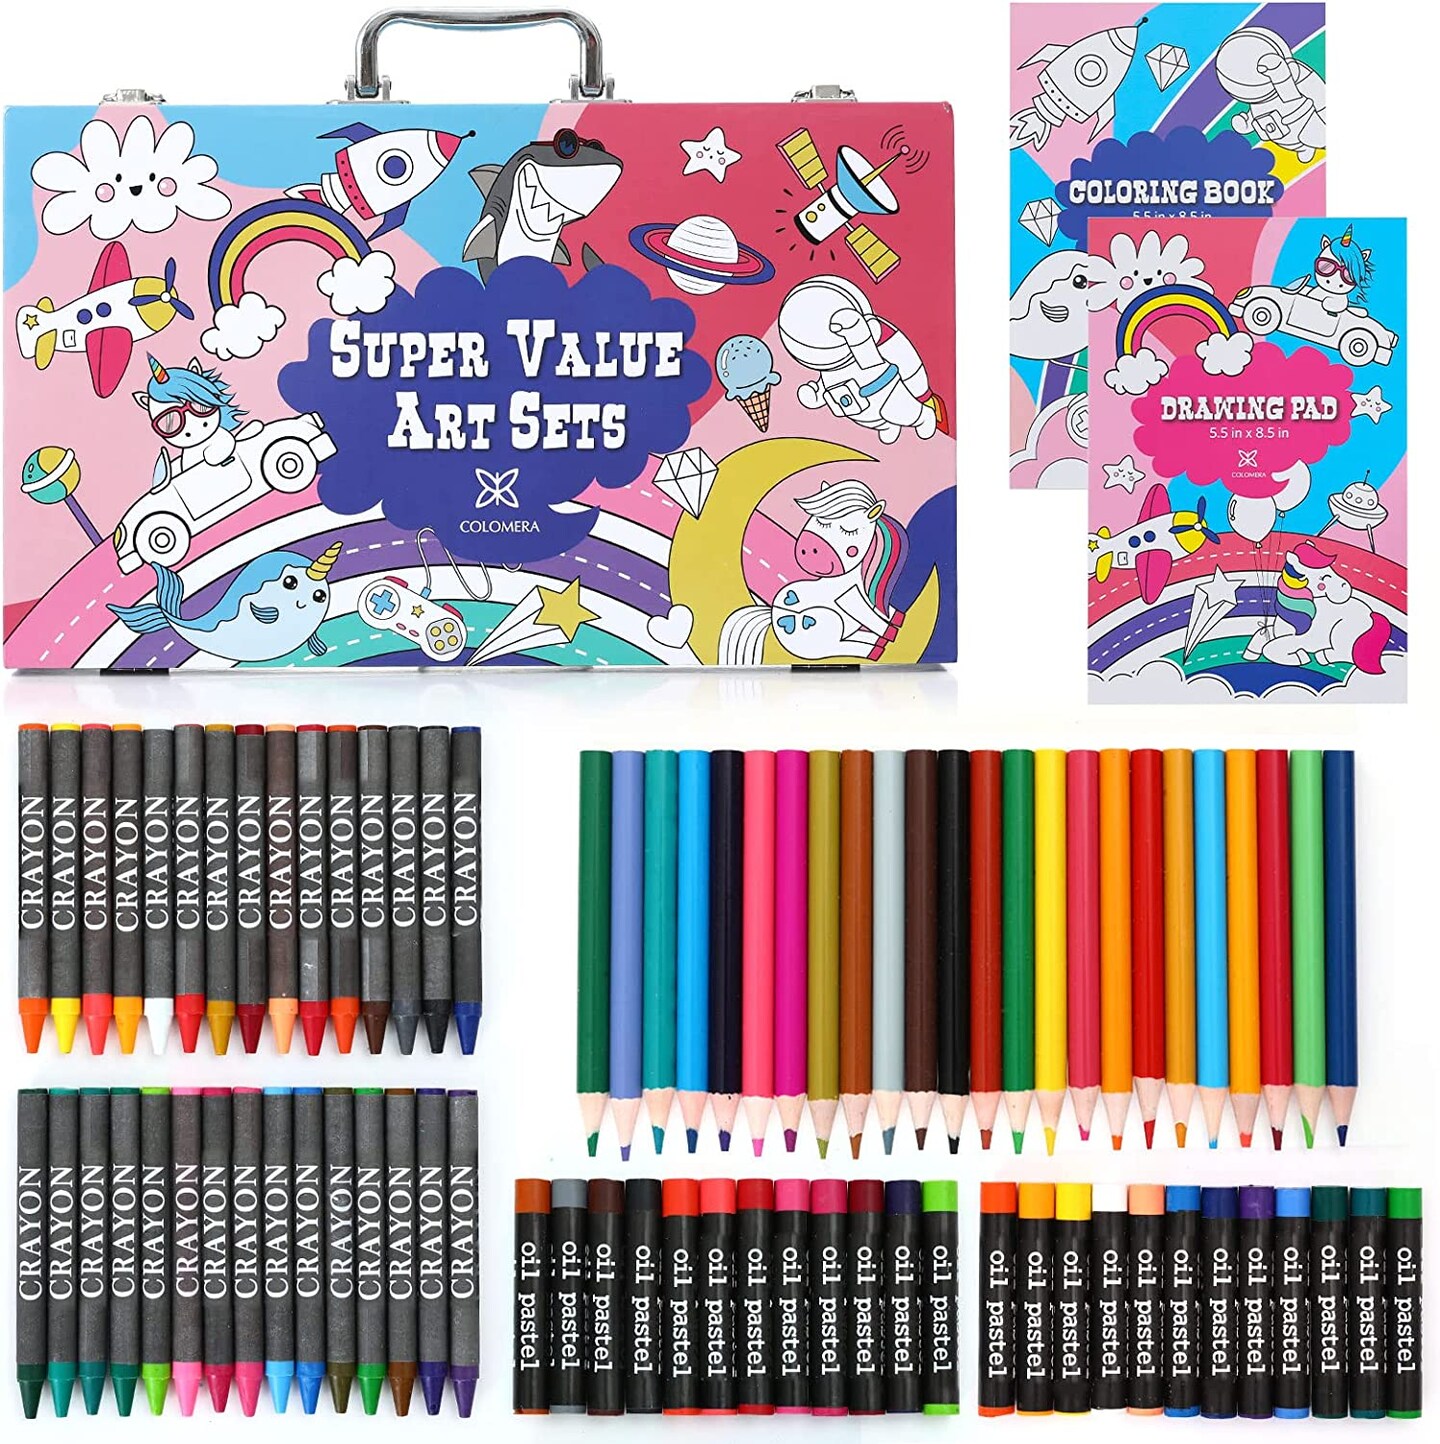  276 PCS Art Supplies Drawing Art Kit for Kids Adults Set with  Double Sided Trifold Easel Box with Oil Pastels, Crayons, Colored Pencils,  Paint Brush, Watercolor Cakes ect. Gift for Girls